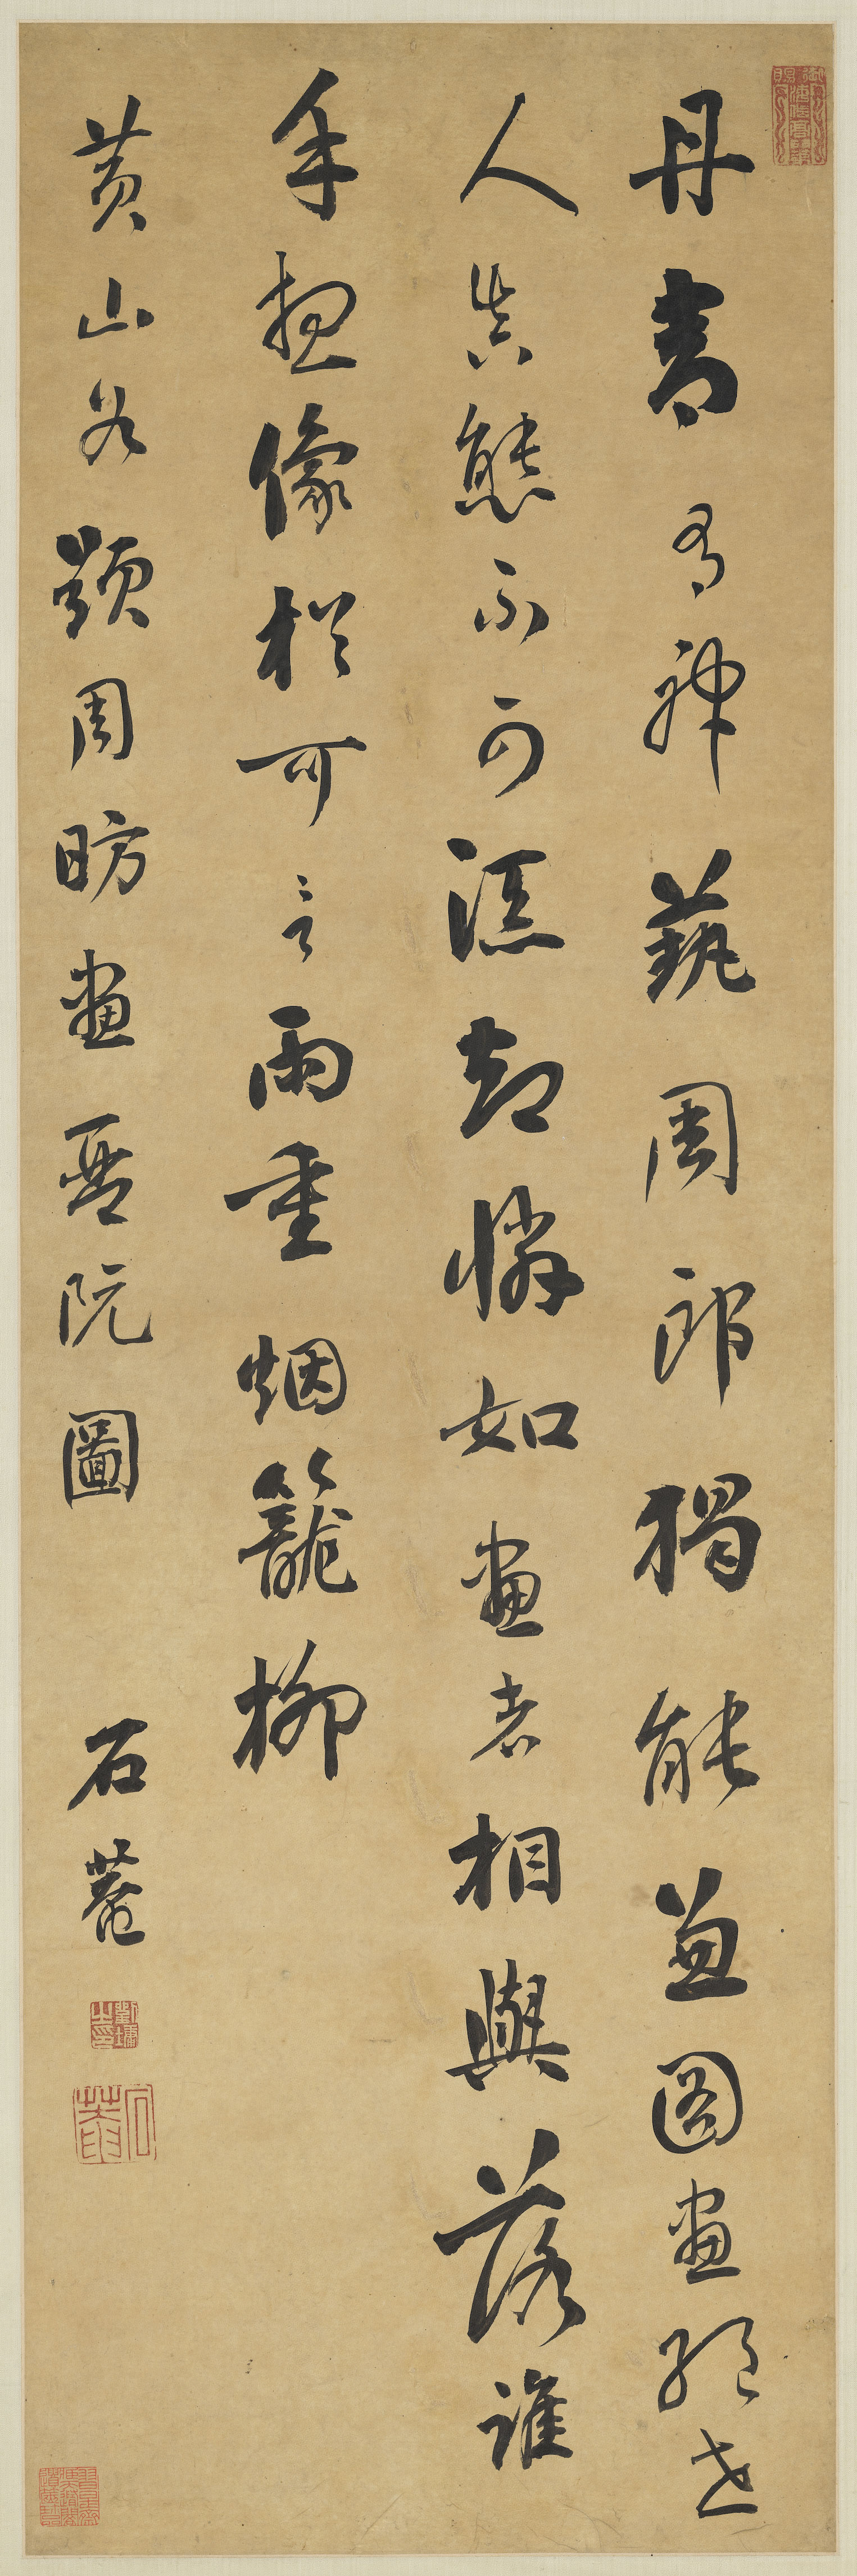 Copy of Huang Tingjian’s Inscription for “Playing a Zither” Painted by Zhou Fang